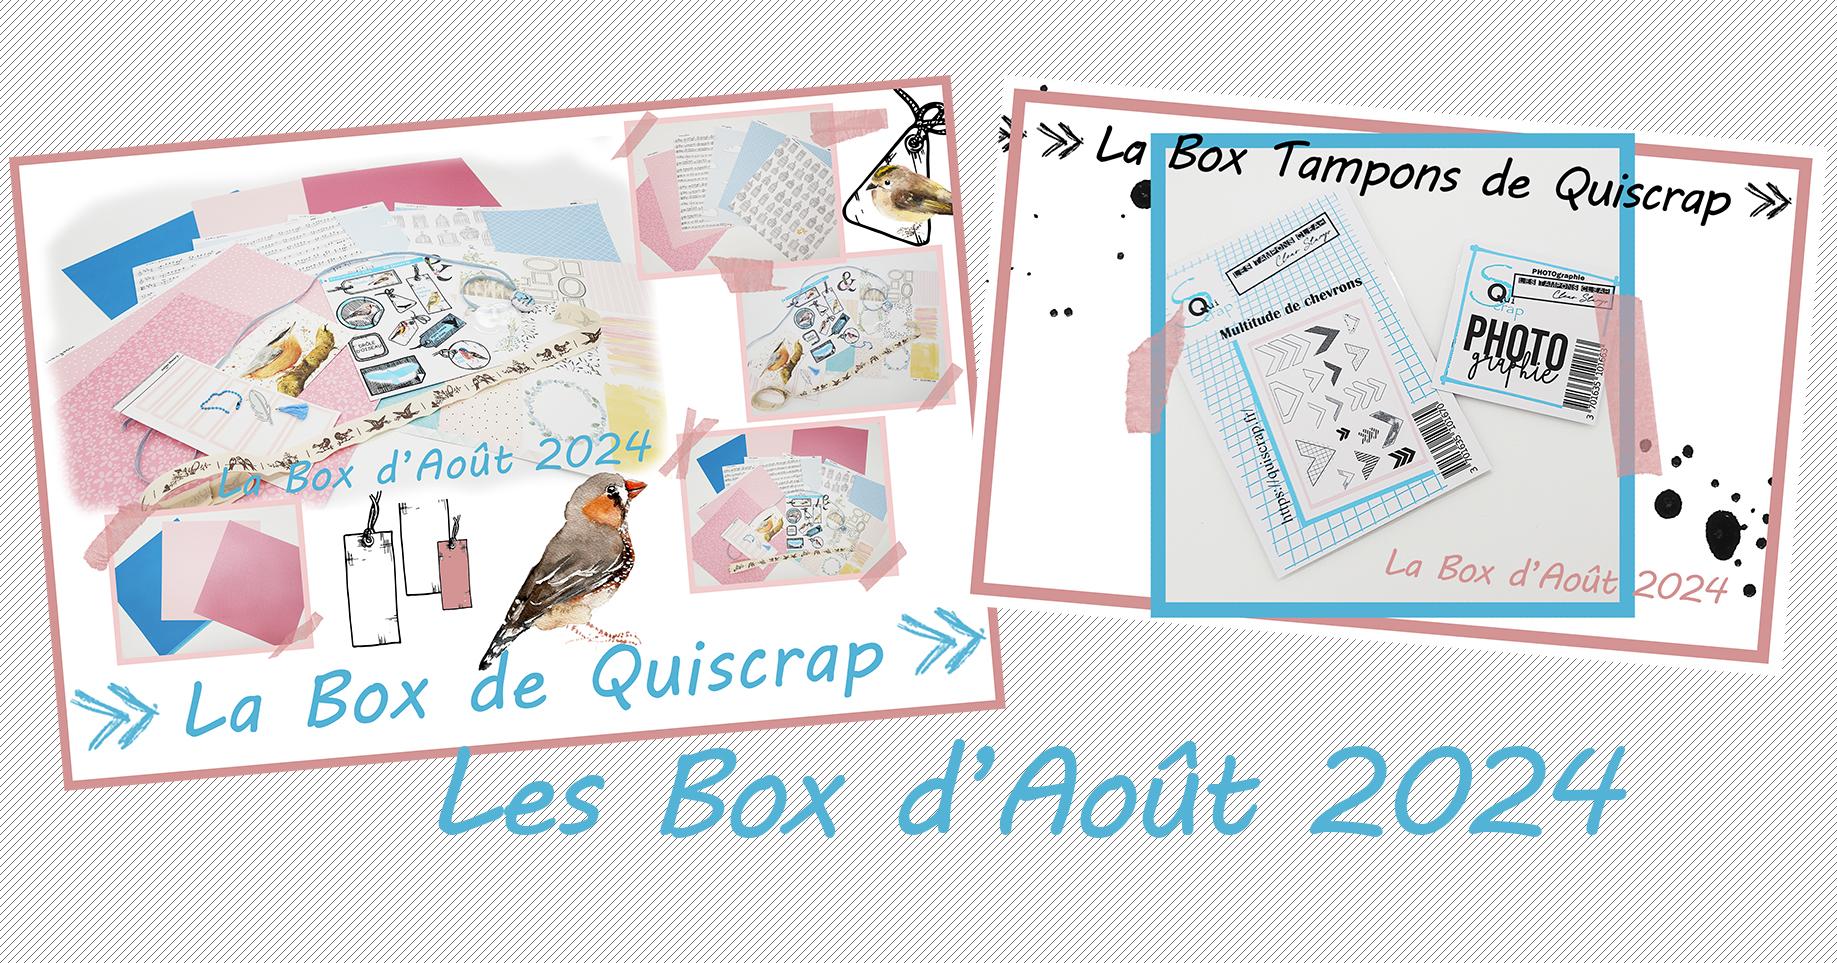 You are currently viewing Les Box d’Août 2024